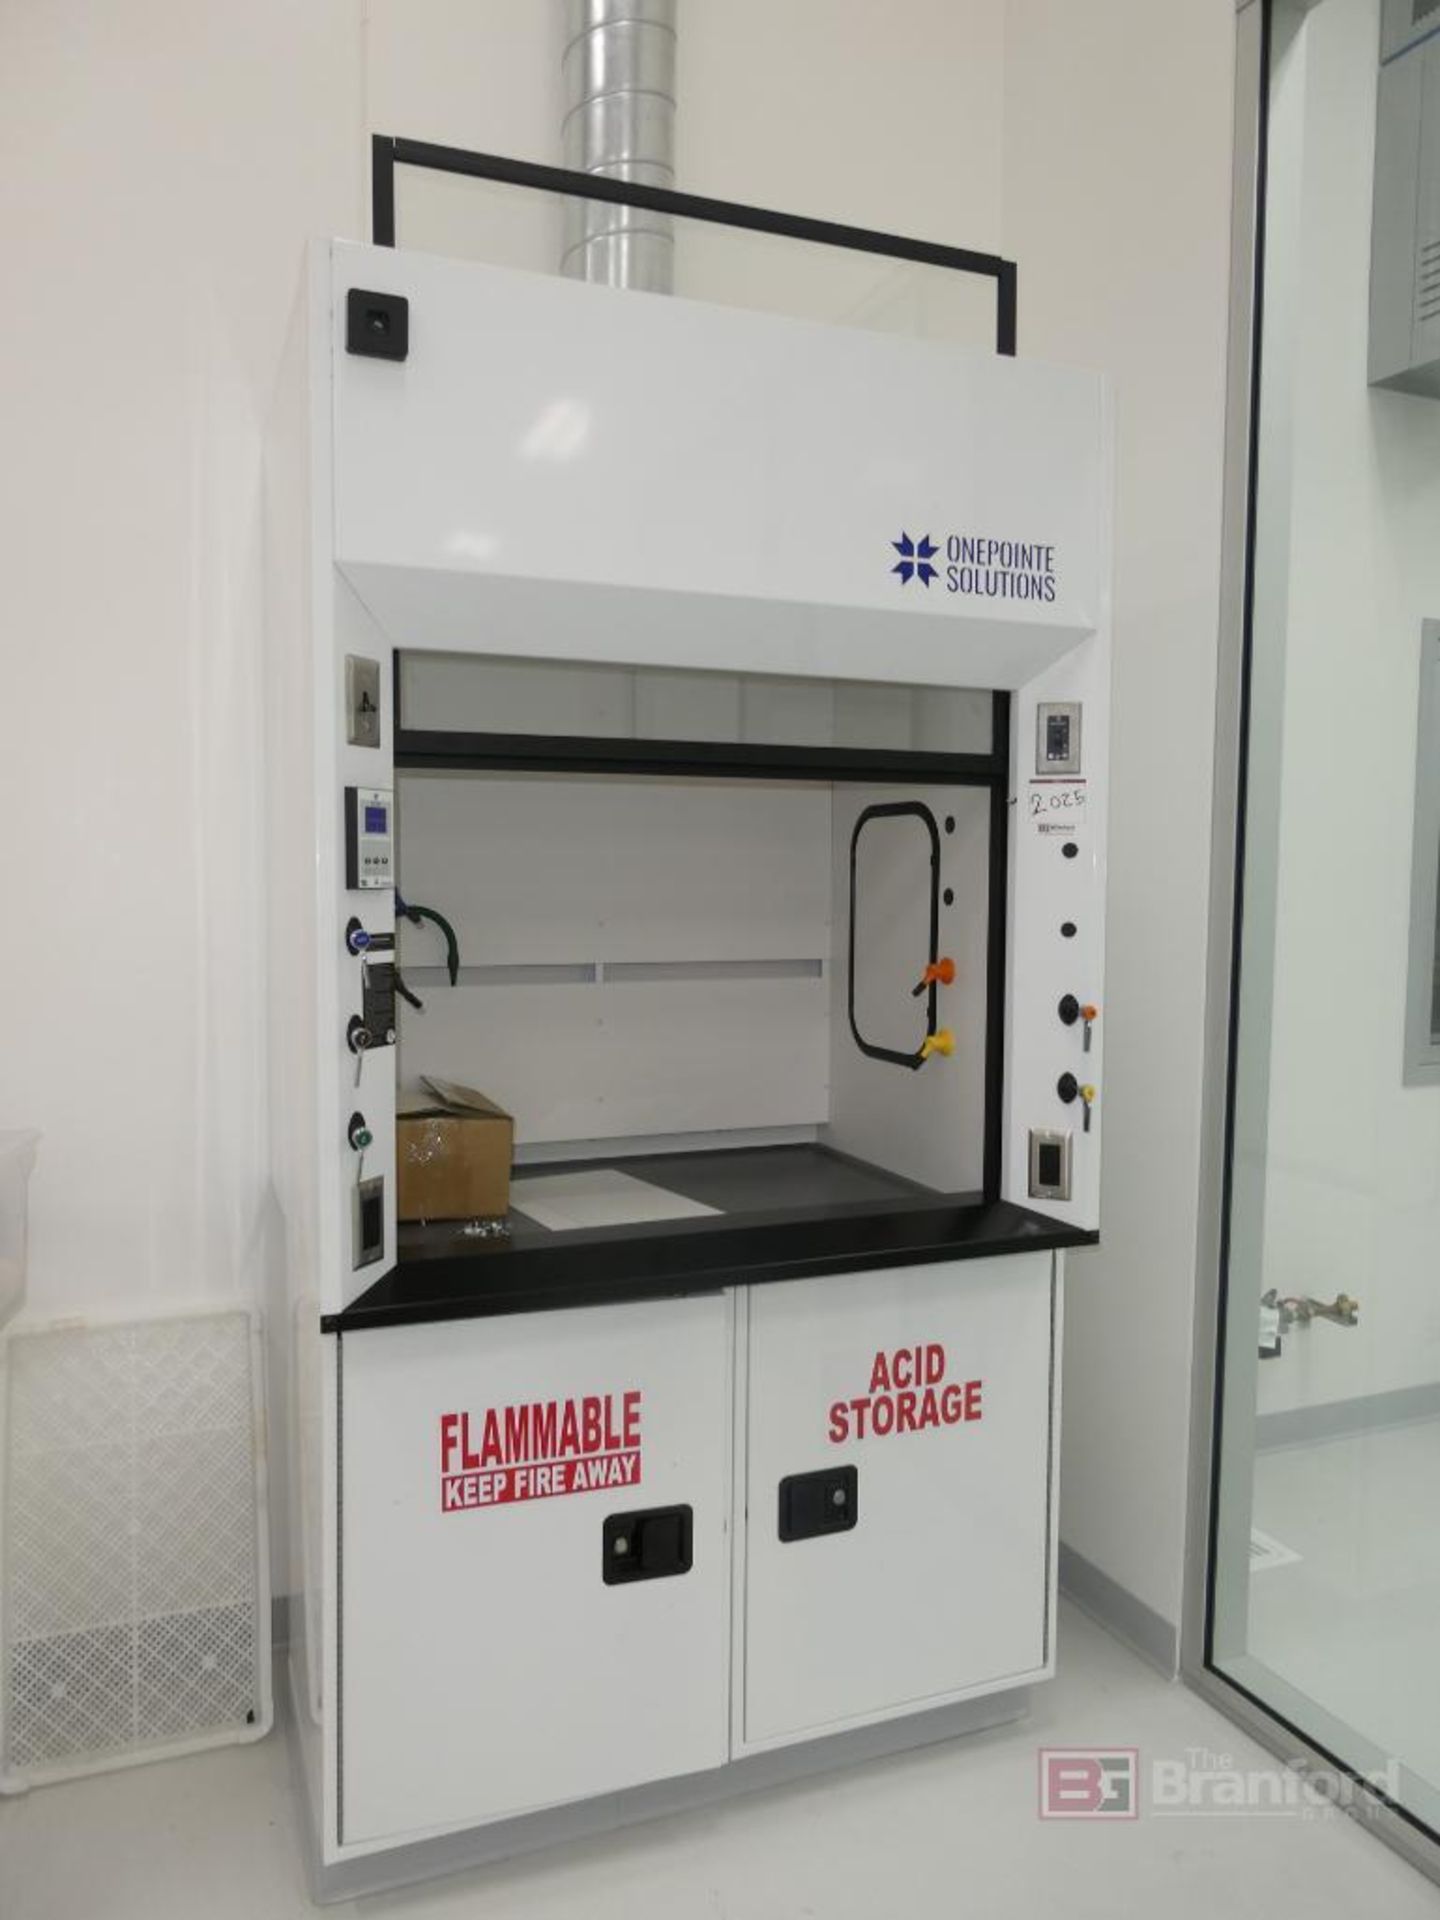 OnePointe Solutions Lab Fume Hood